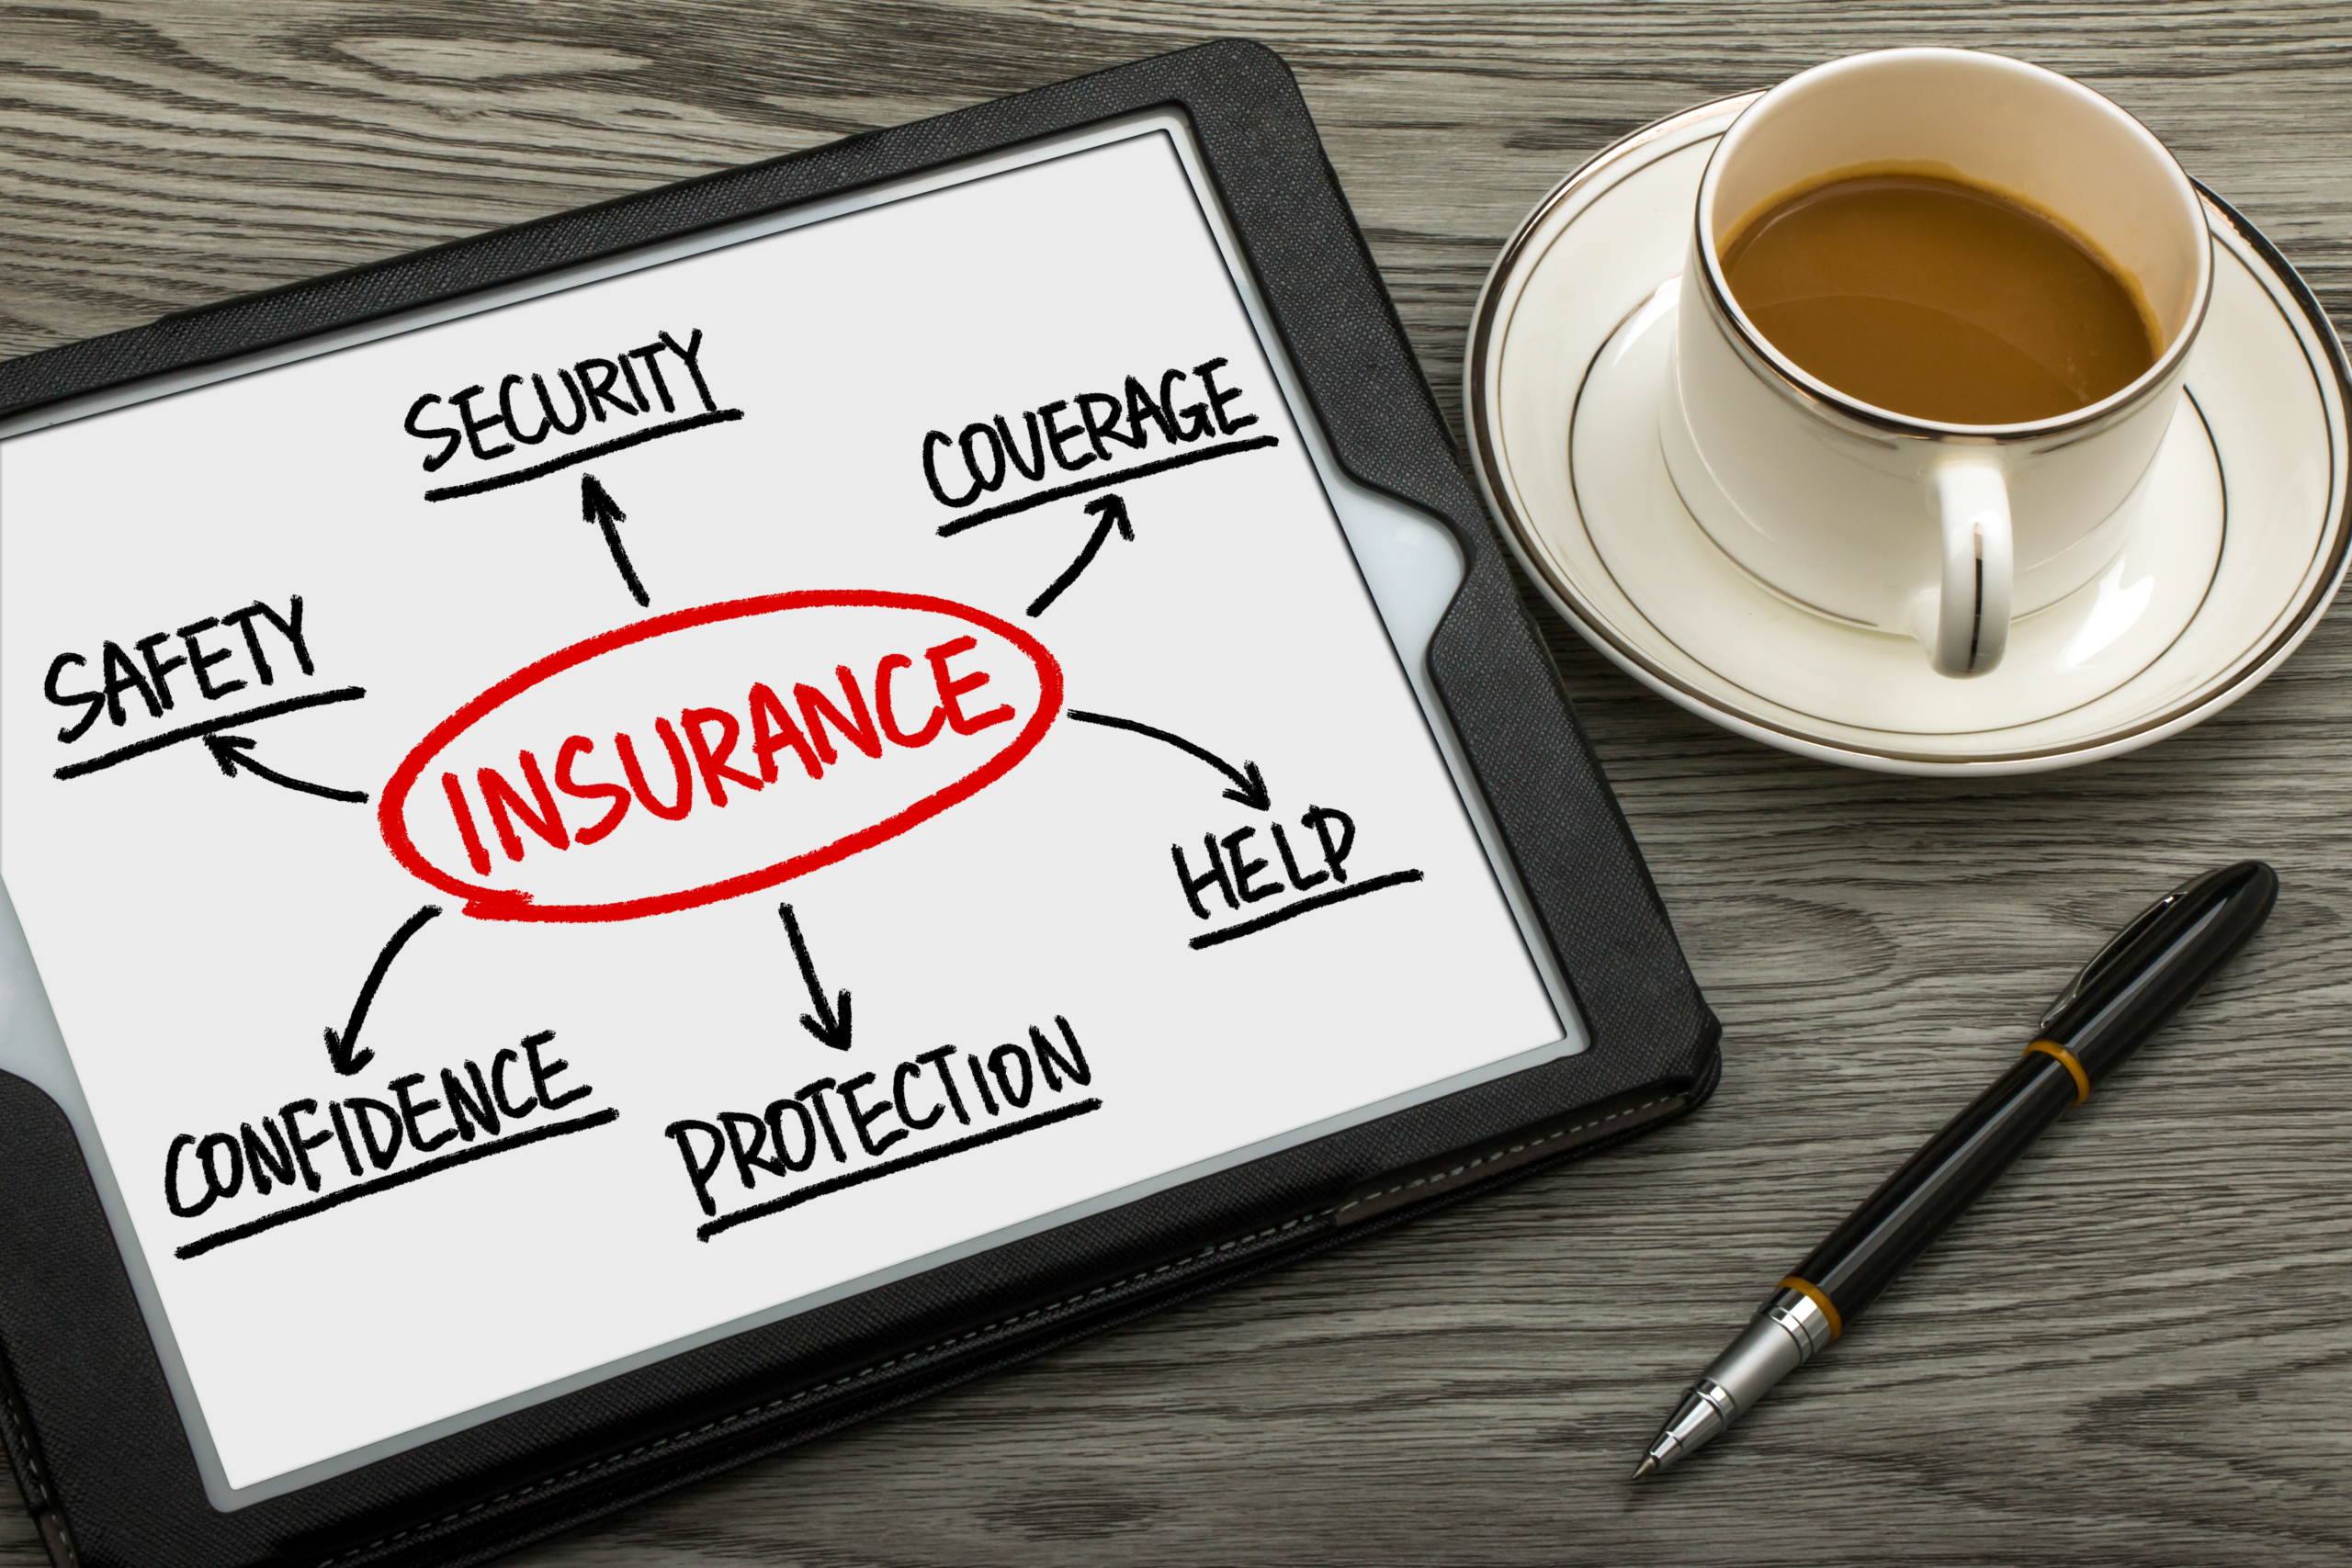 Featured Image for post: Video Tips: 5 Types of Insurance You Might Not Know About